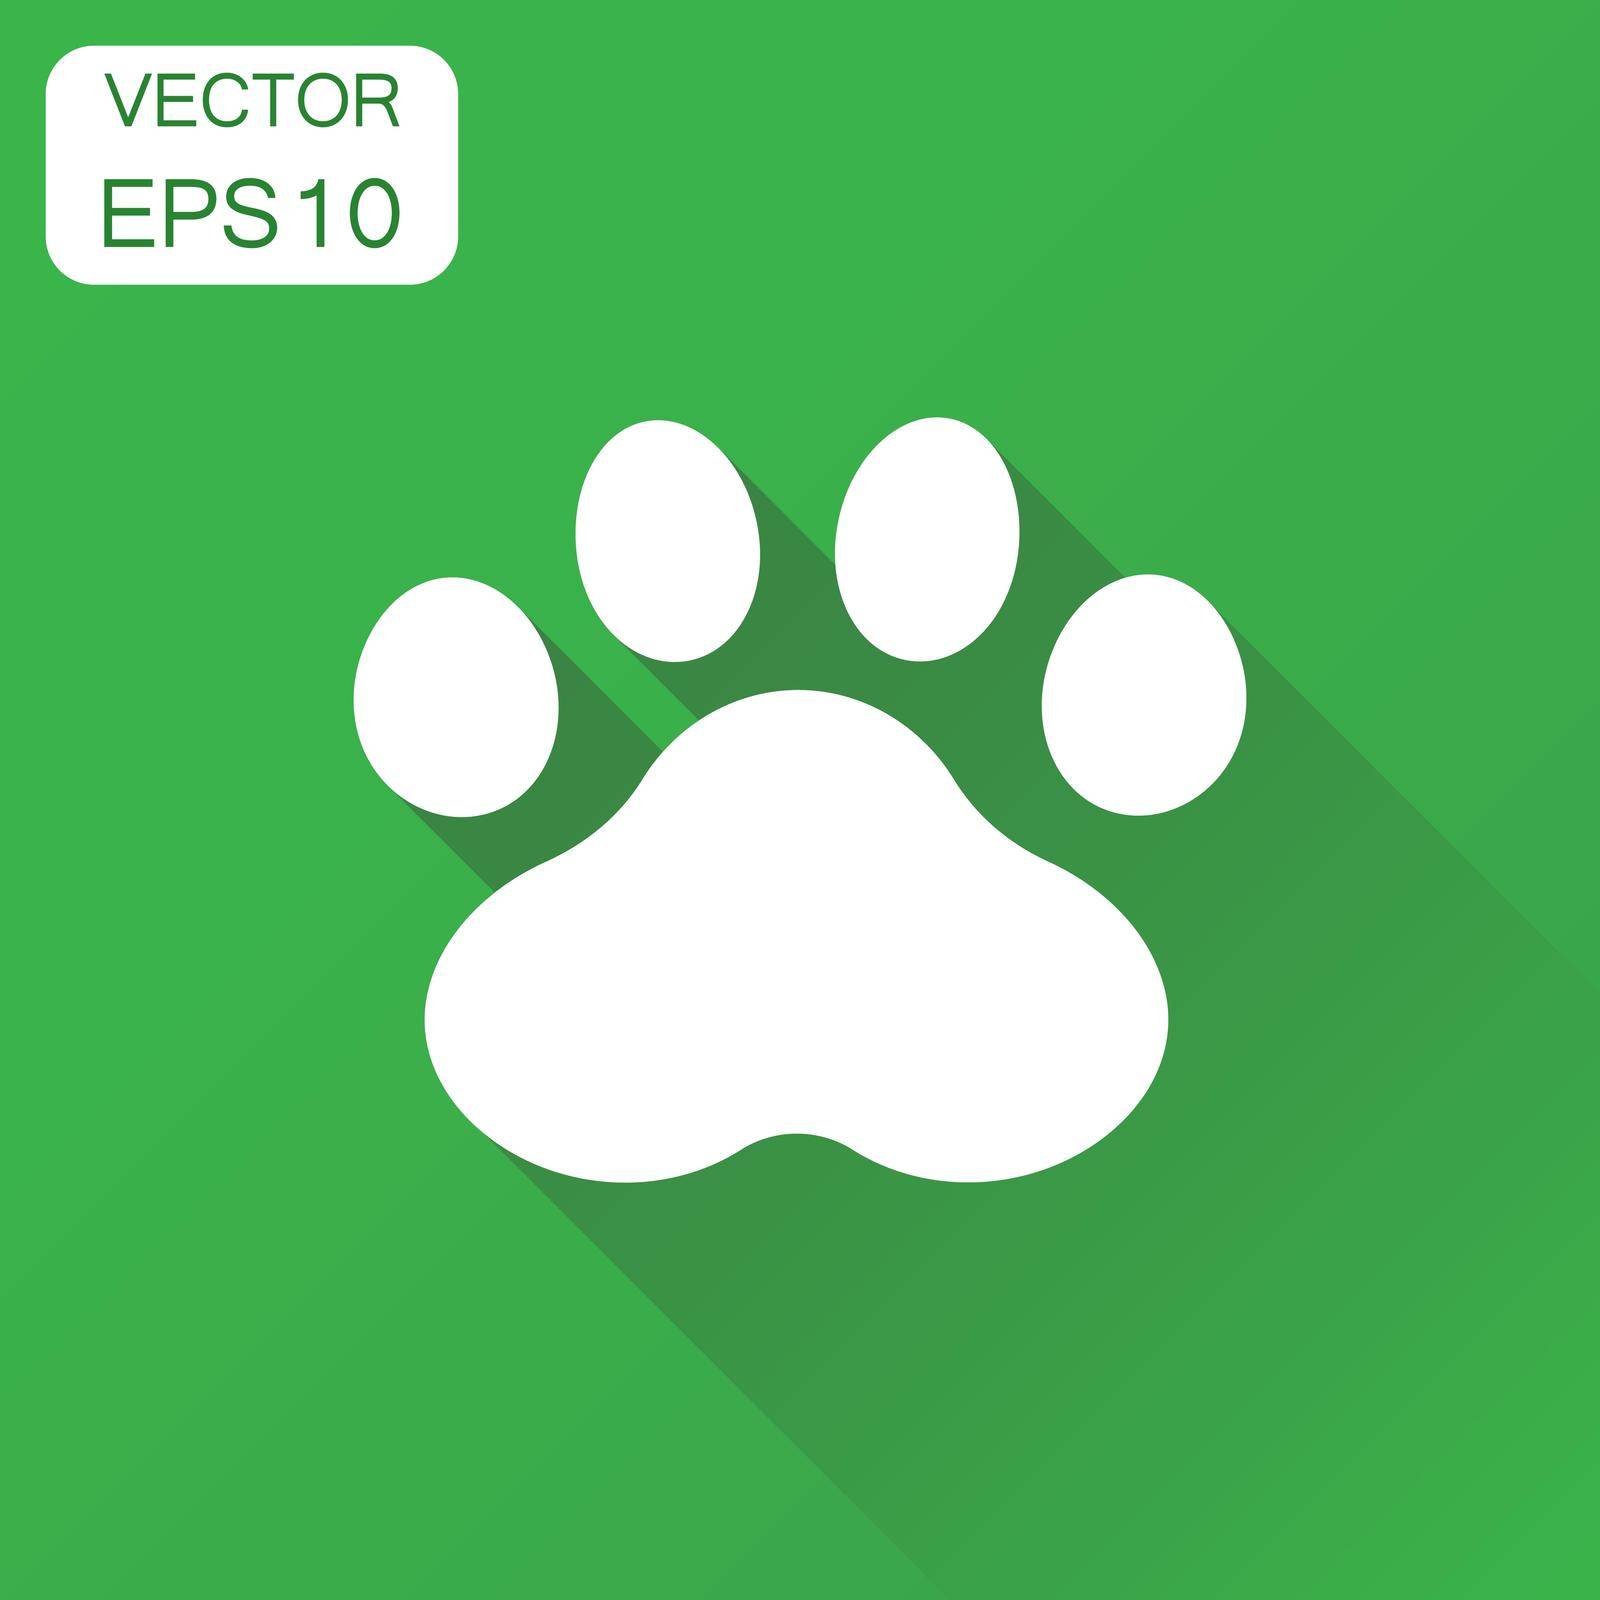 Paw print icon. Business concept dog or cat pawprint pictogram. Vector illustration on green background with long shadow. by LysenkoA